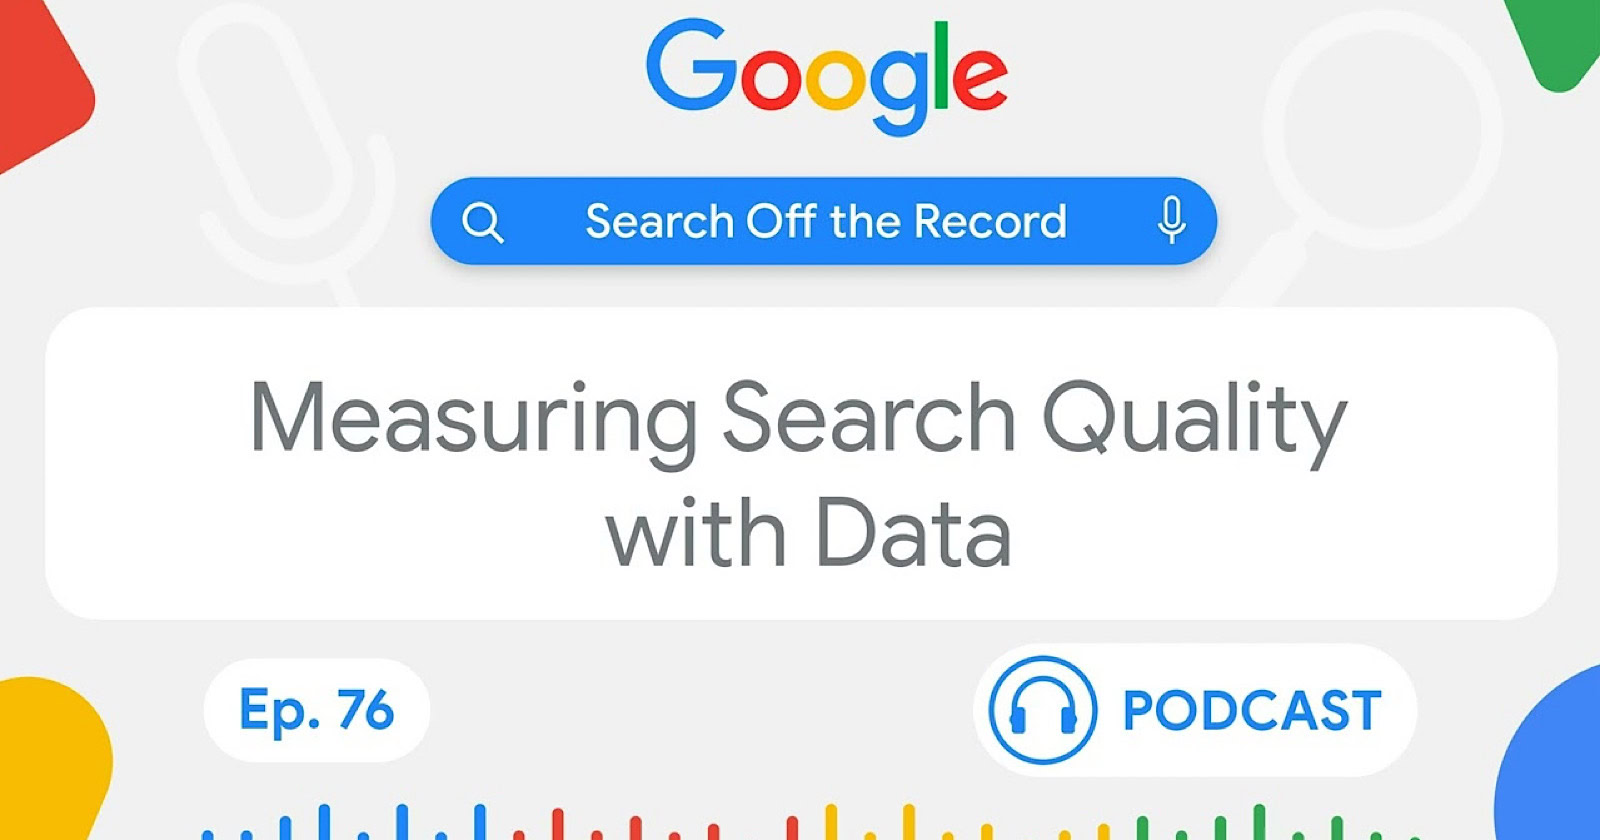 Google reveals how it measures search quality